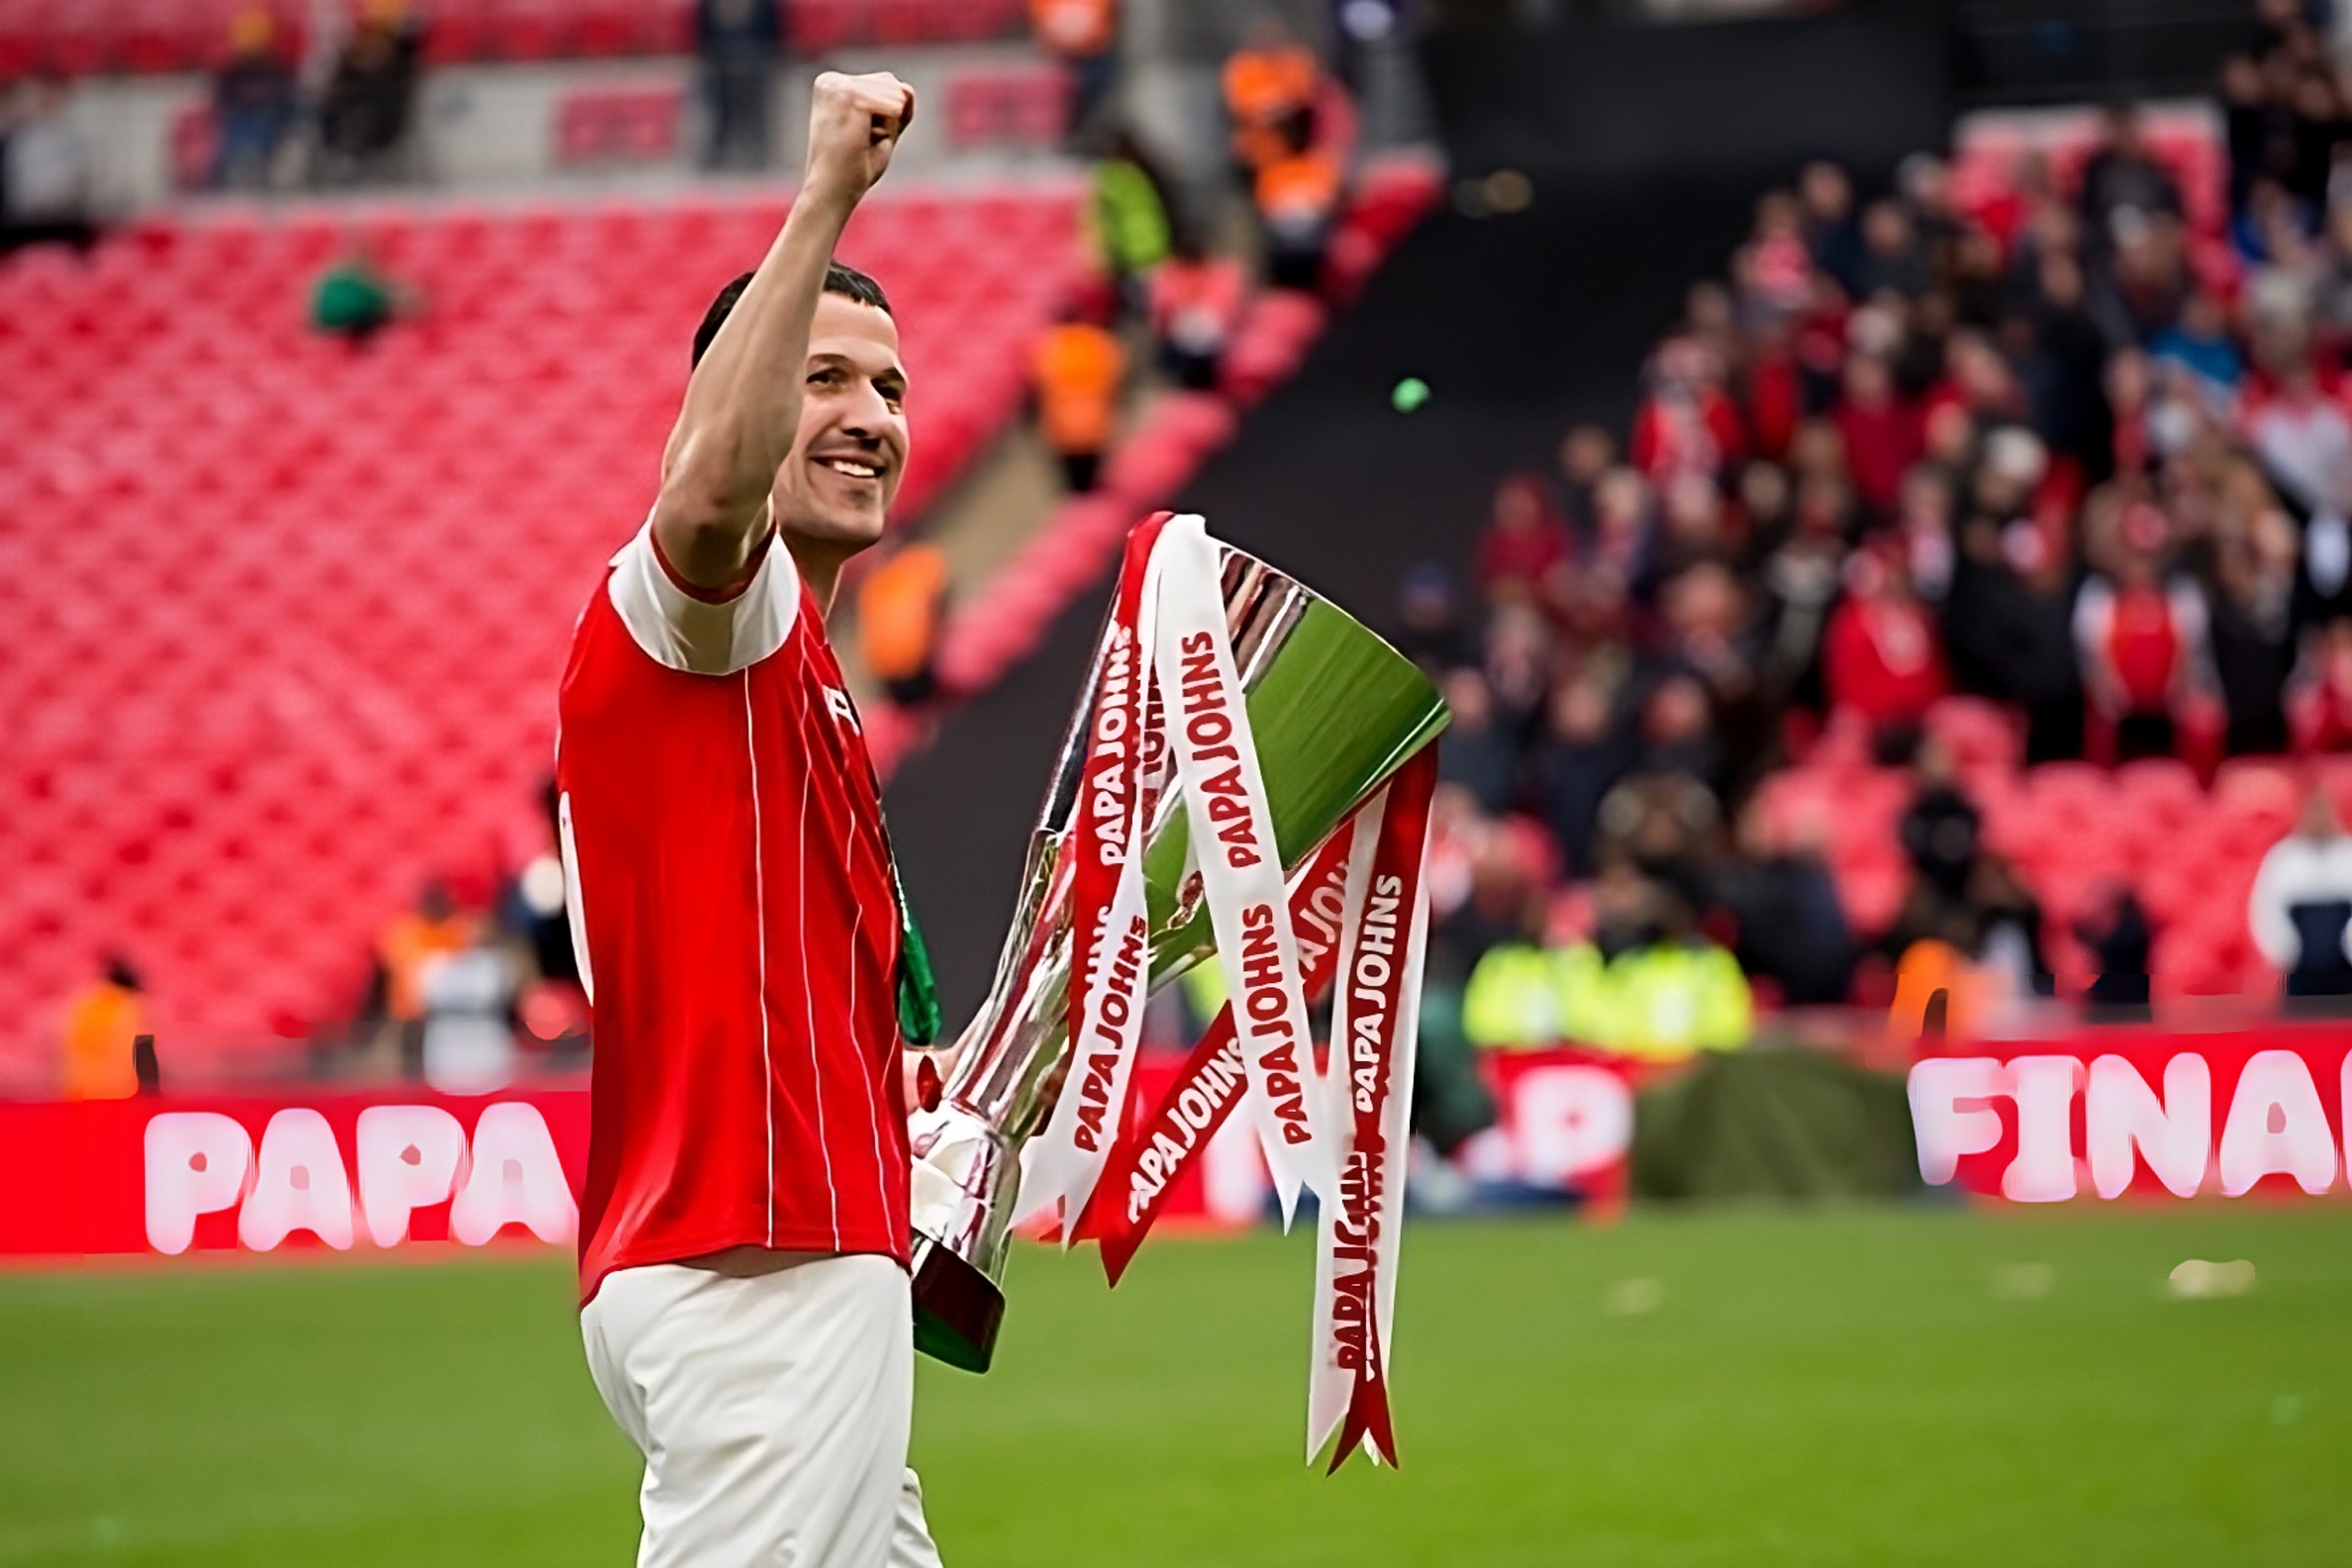 Doncaster Rovers sign Richard Wood, pictured celebrating EFL Trophy success with Rotherham United